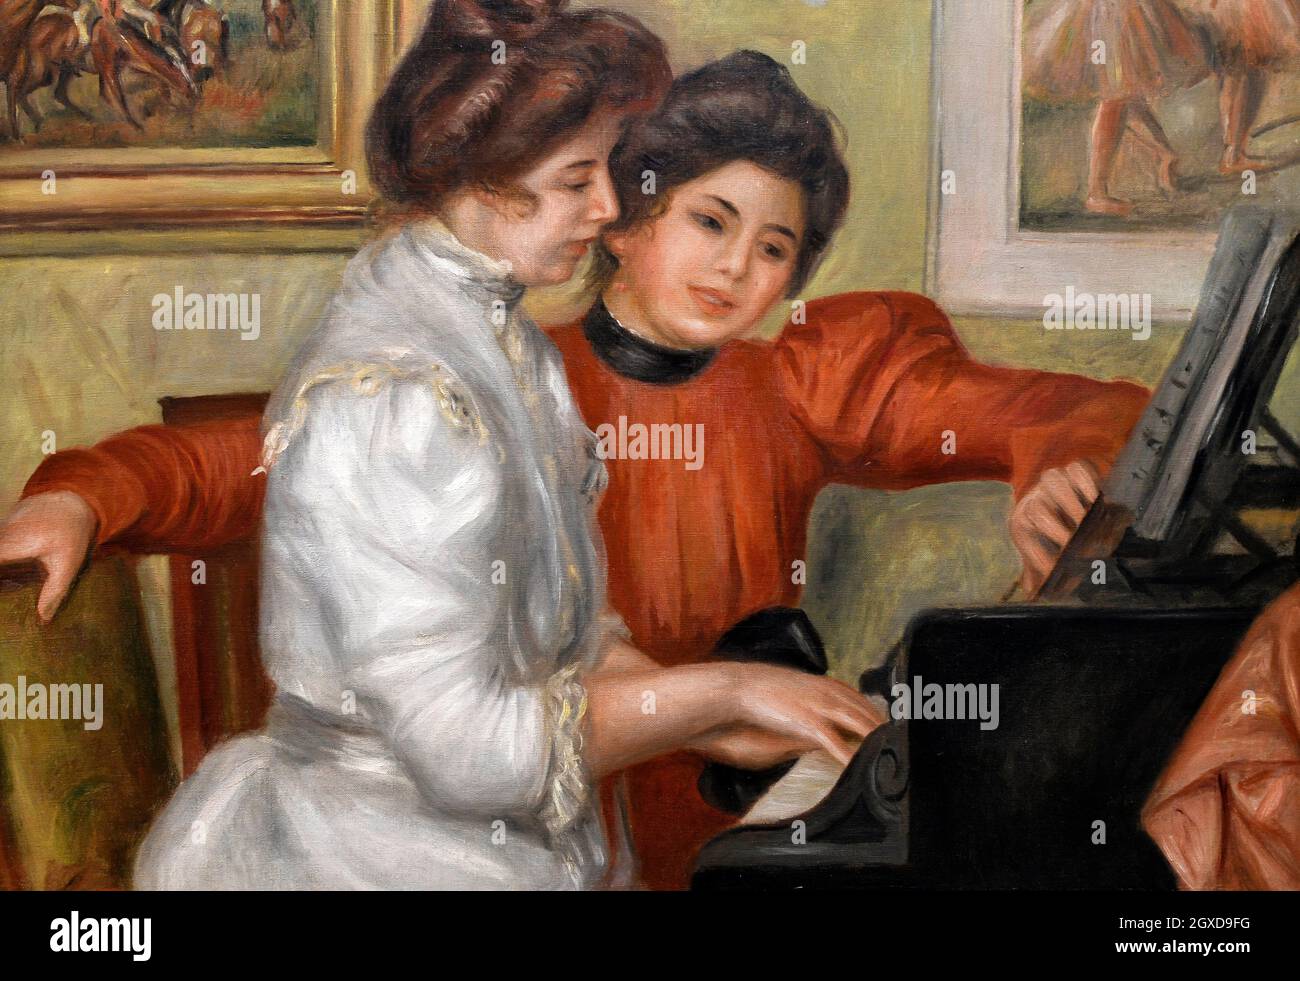 Two Young Girls at the Piano, by Pierre-Auguste Renoir Stock Photo - Alamy